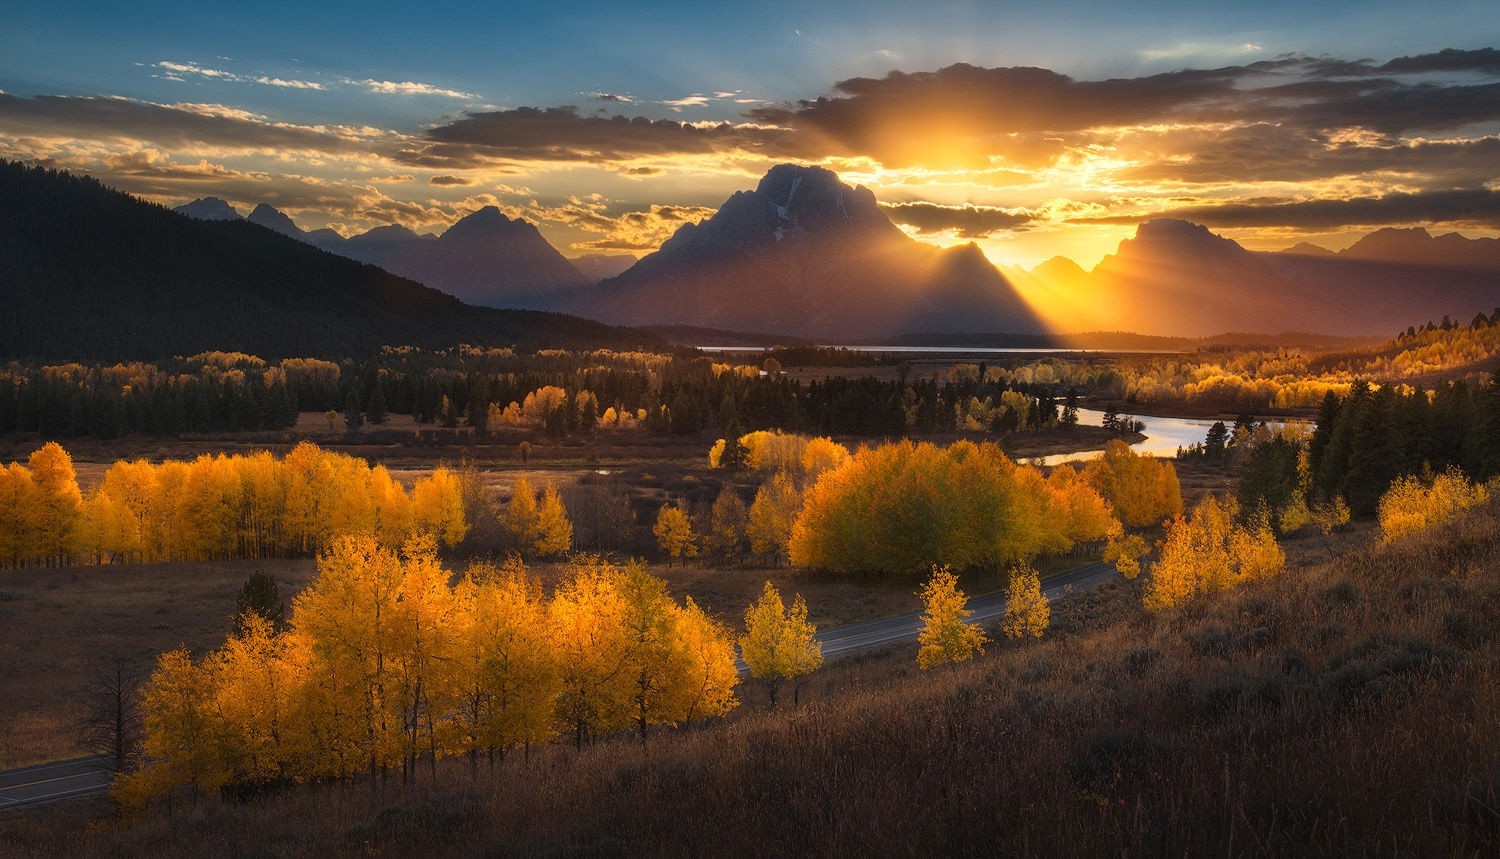 General 1500x859 nature photography landscape sunset mountains sun rays forest river fall road dry grass trees clouds Grand Teton National Park Wyoming